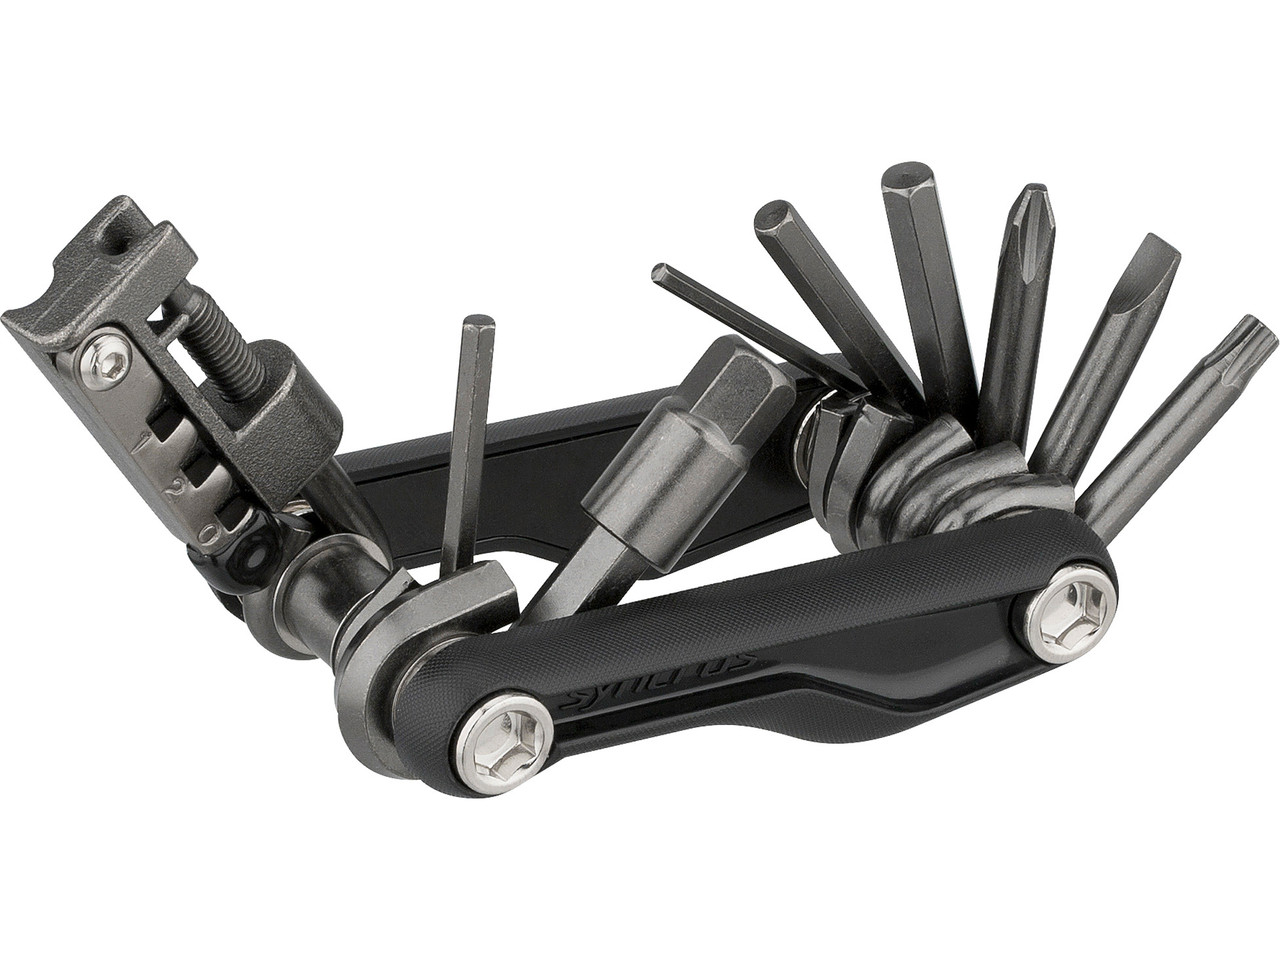 Syncros Composite 14CT Multitool